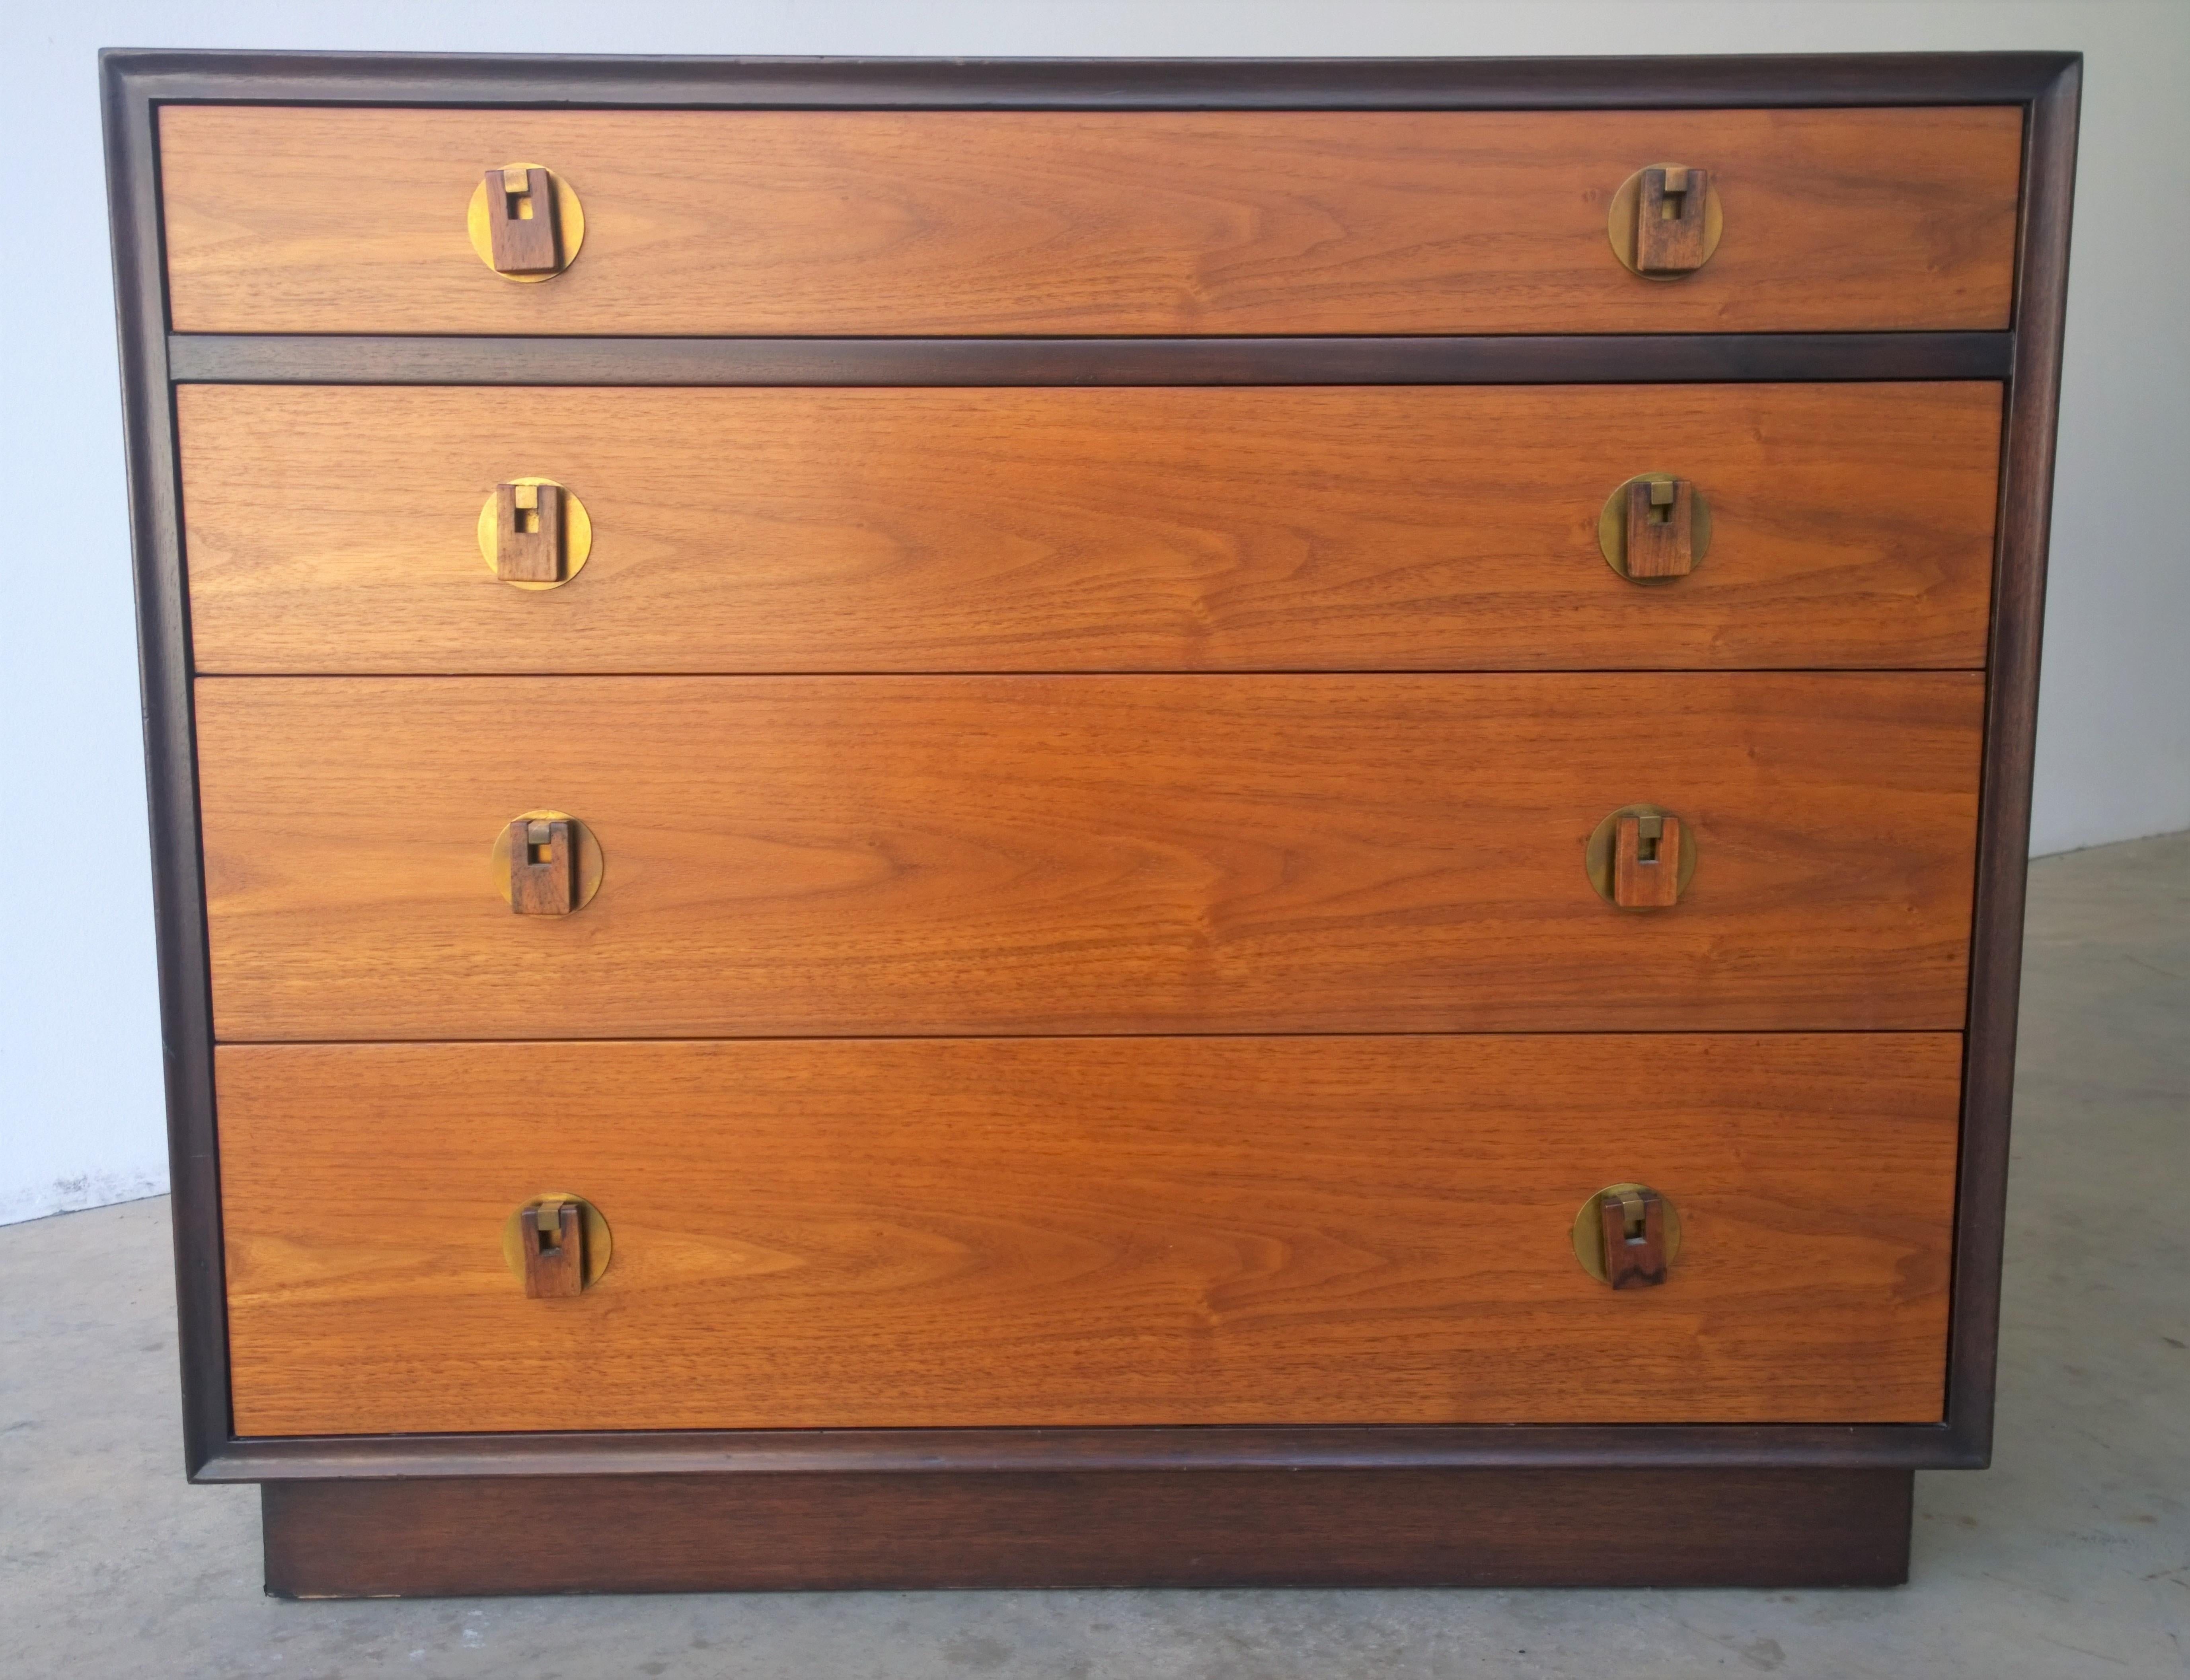 Offered is a Mid-Century Modern Edward Wormley for Dunbar black or dark brown wood frame with walnut drawers and brass pulls, chest of drawers or dresser. The offered chest of drawers was purchased at auction from the estate of Walter Hamilton